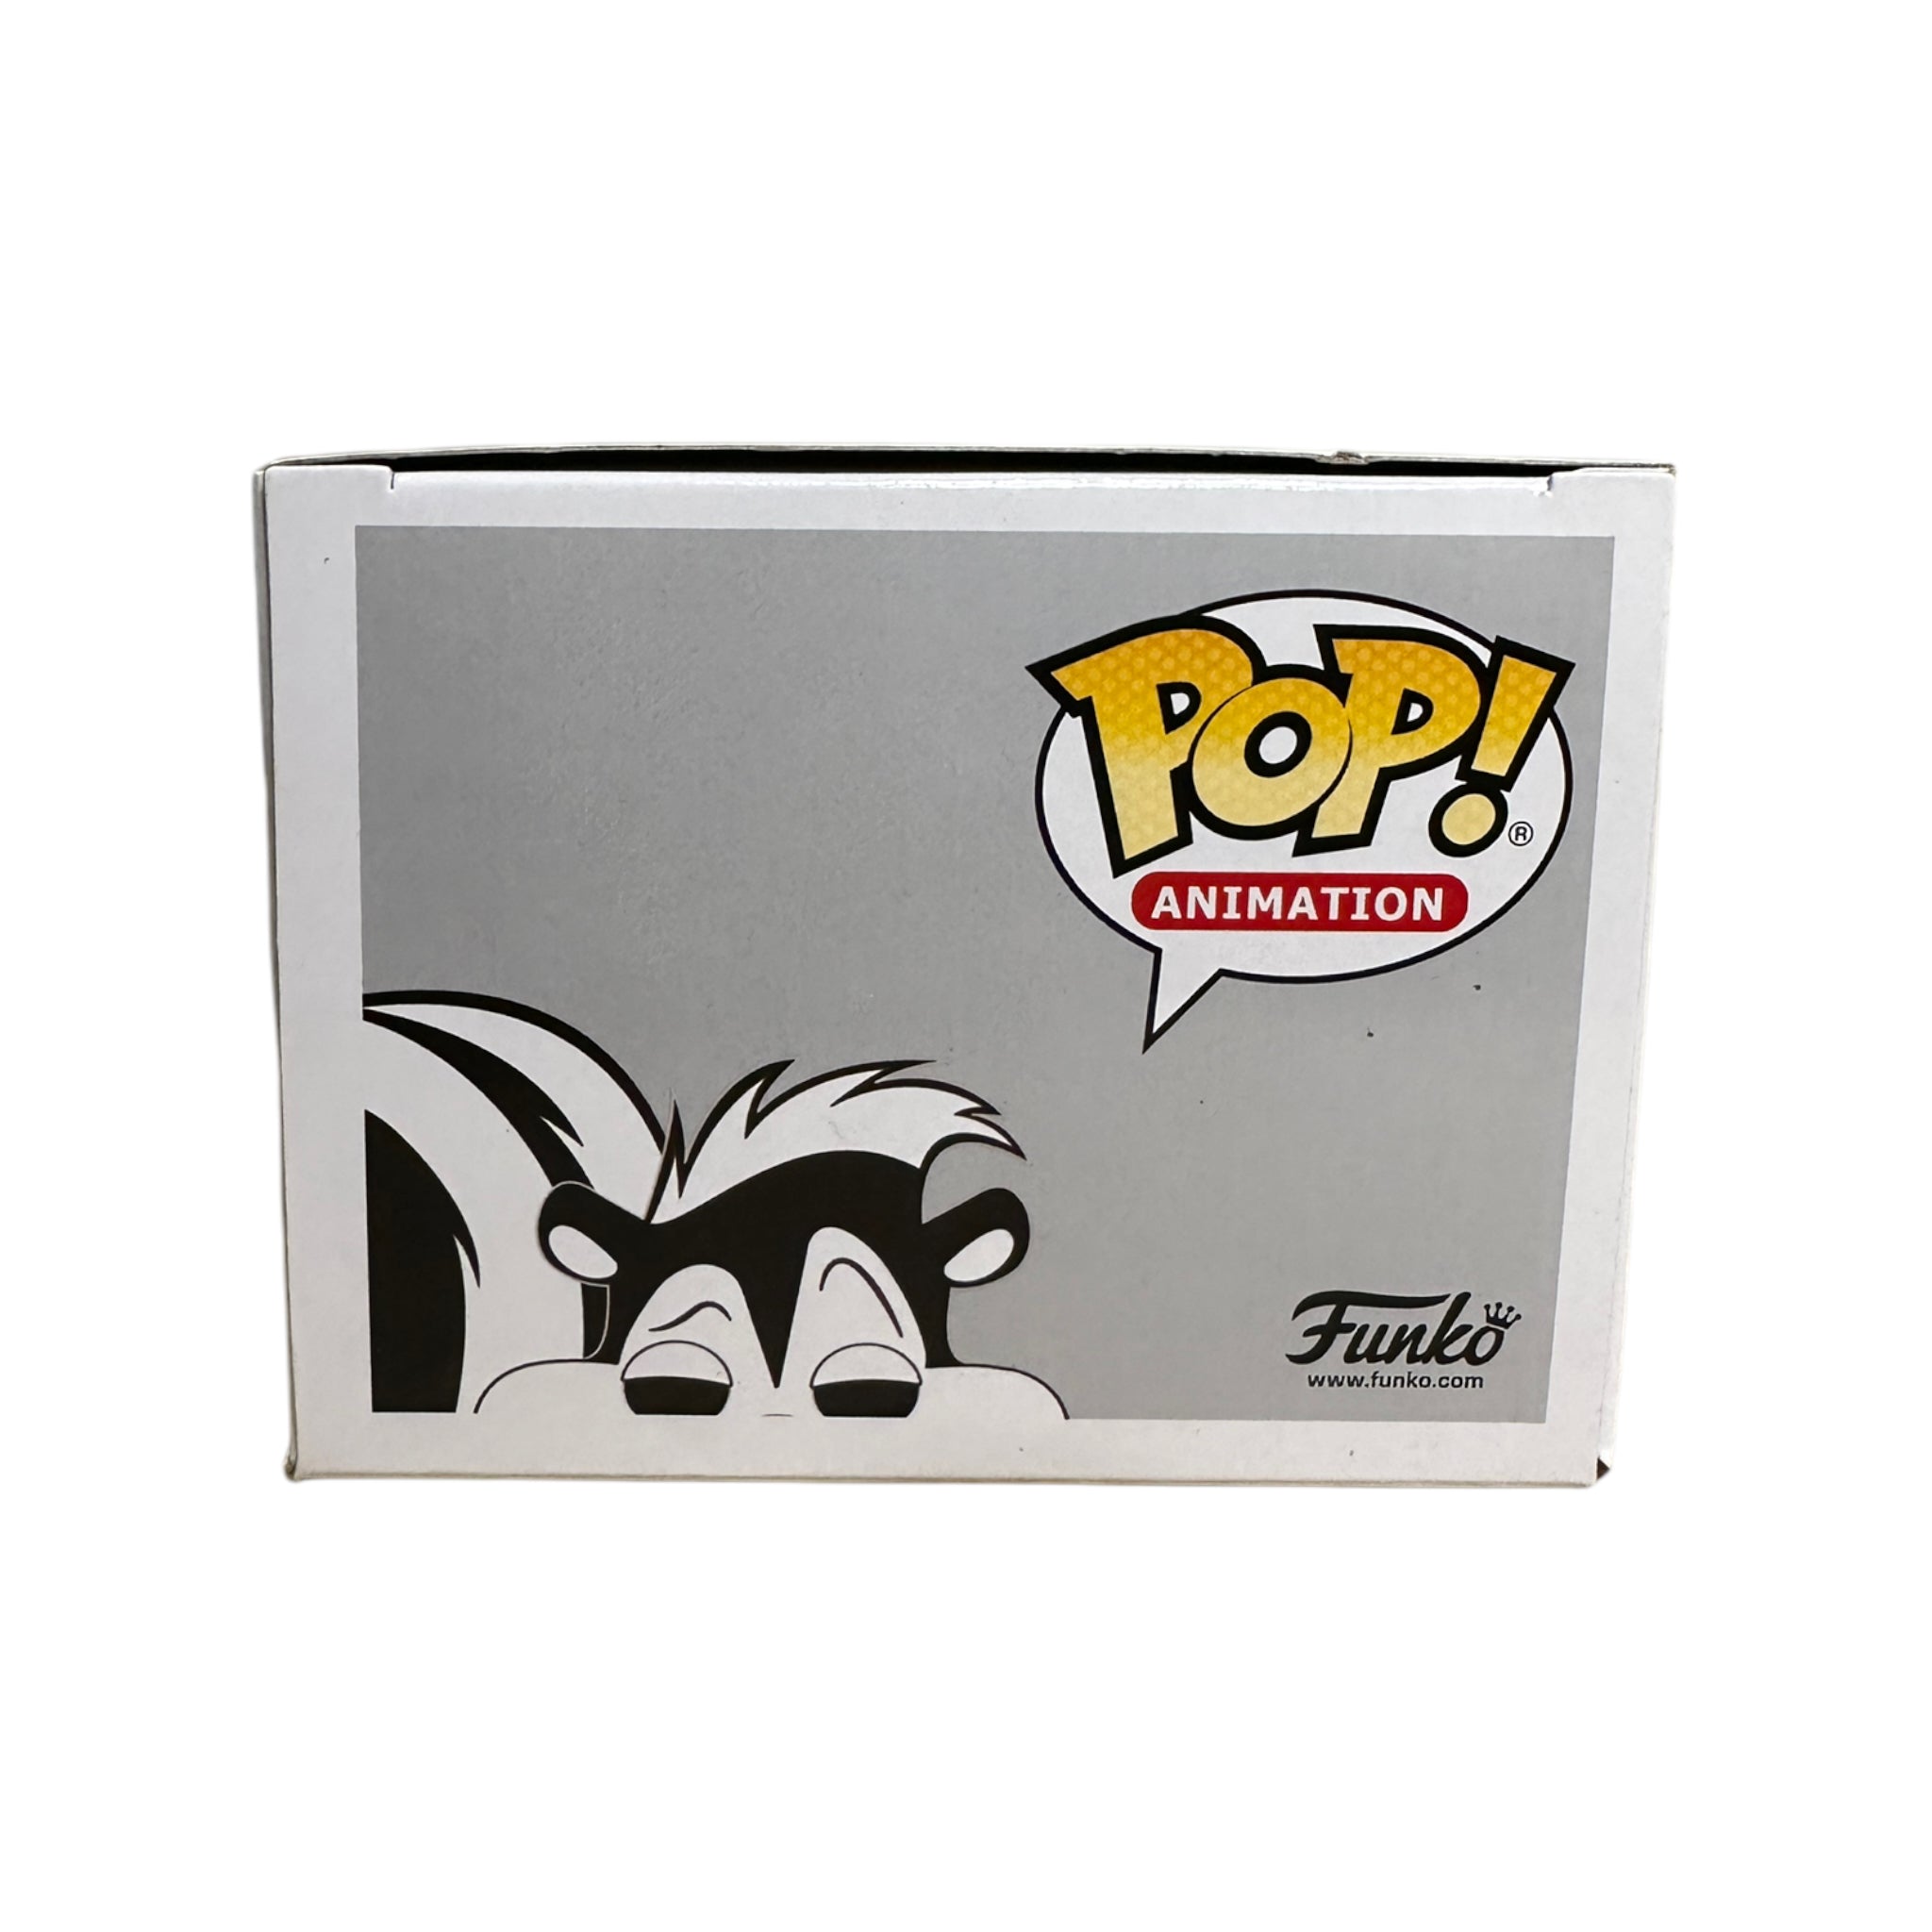 Pepé Le Pew #395 Funko Pop! - Looney Tunes - SDCC 2018 Shared Exclusive - Condition 7.5/10